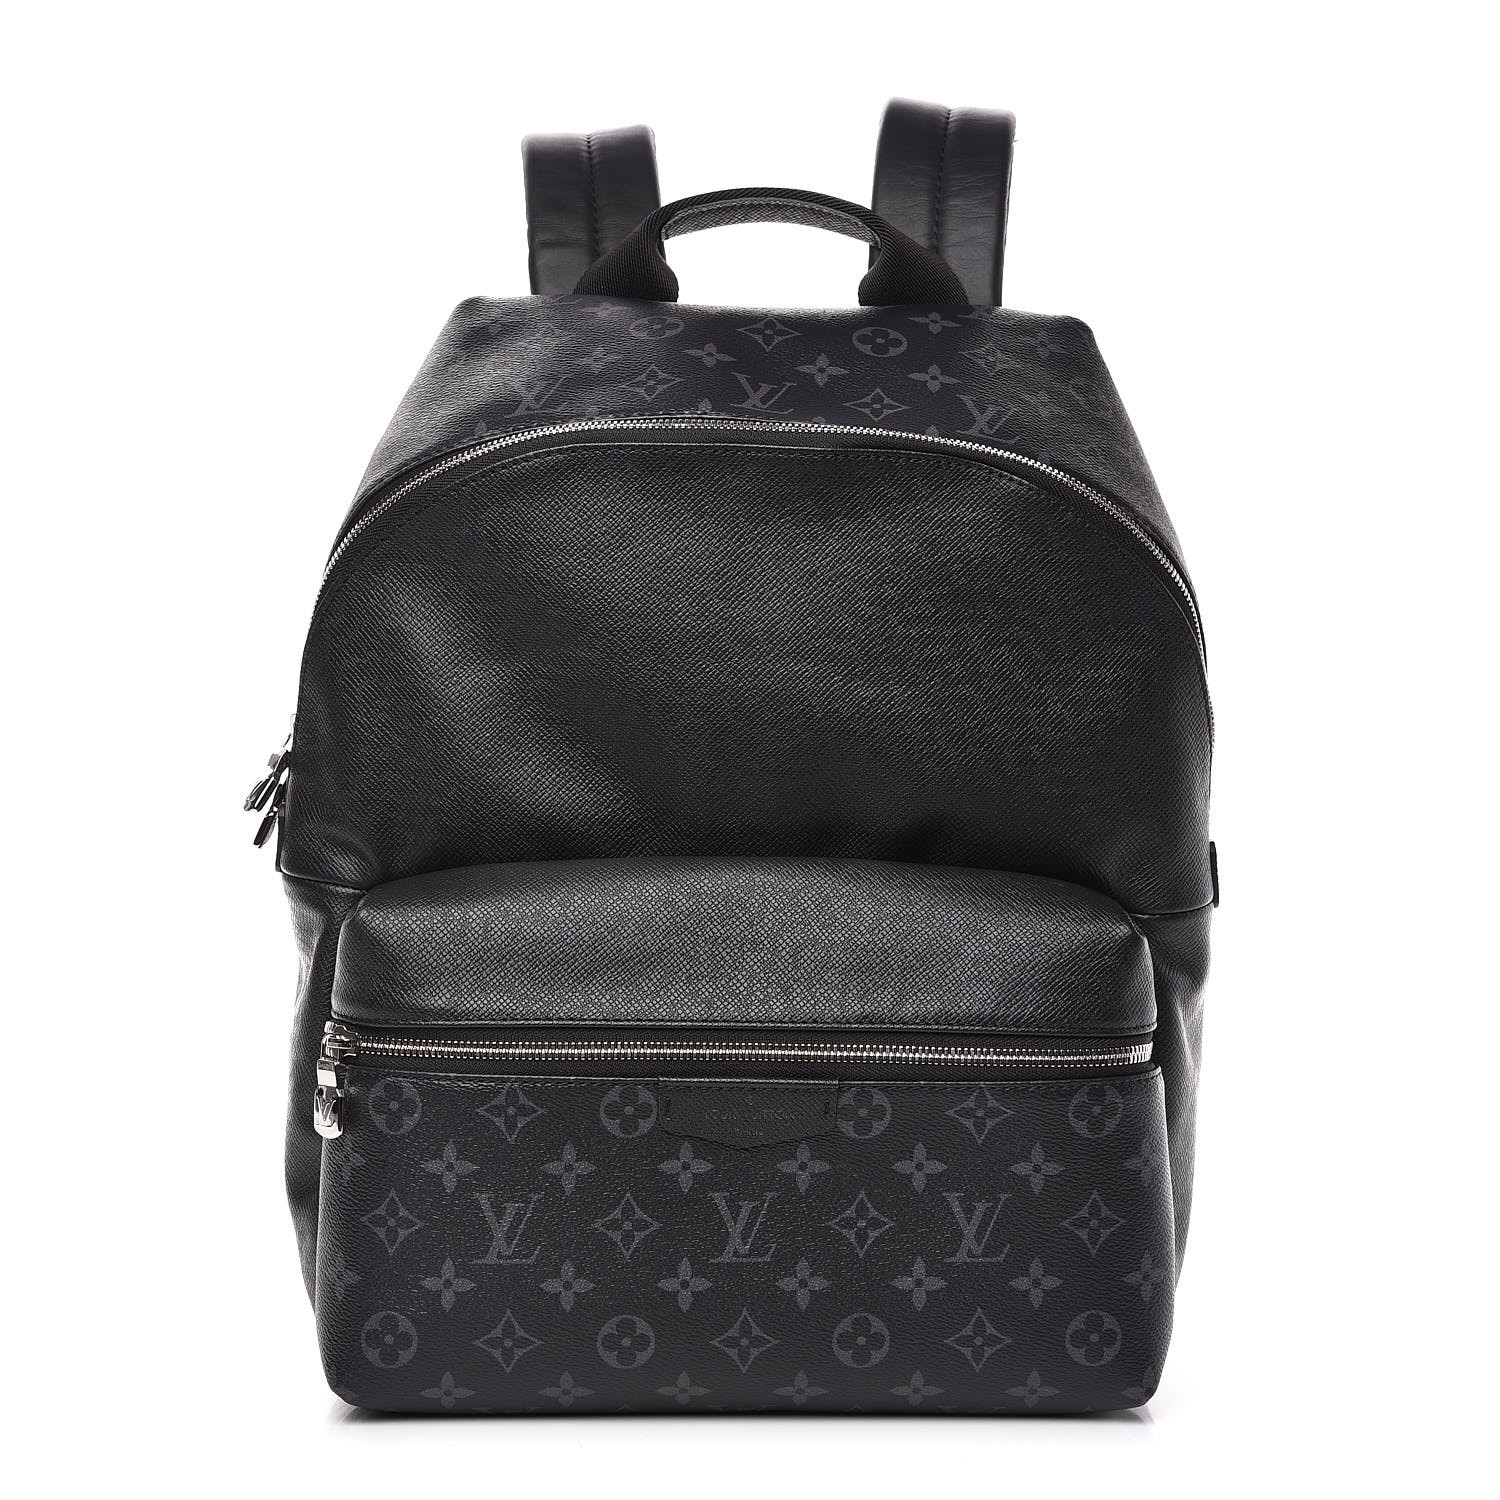 LOUIS VUITTON Monogram Eclipse Taiga Discovery Backpack PM 523965